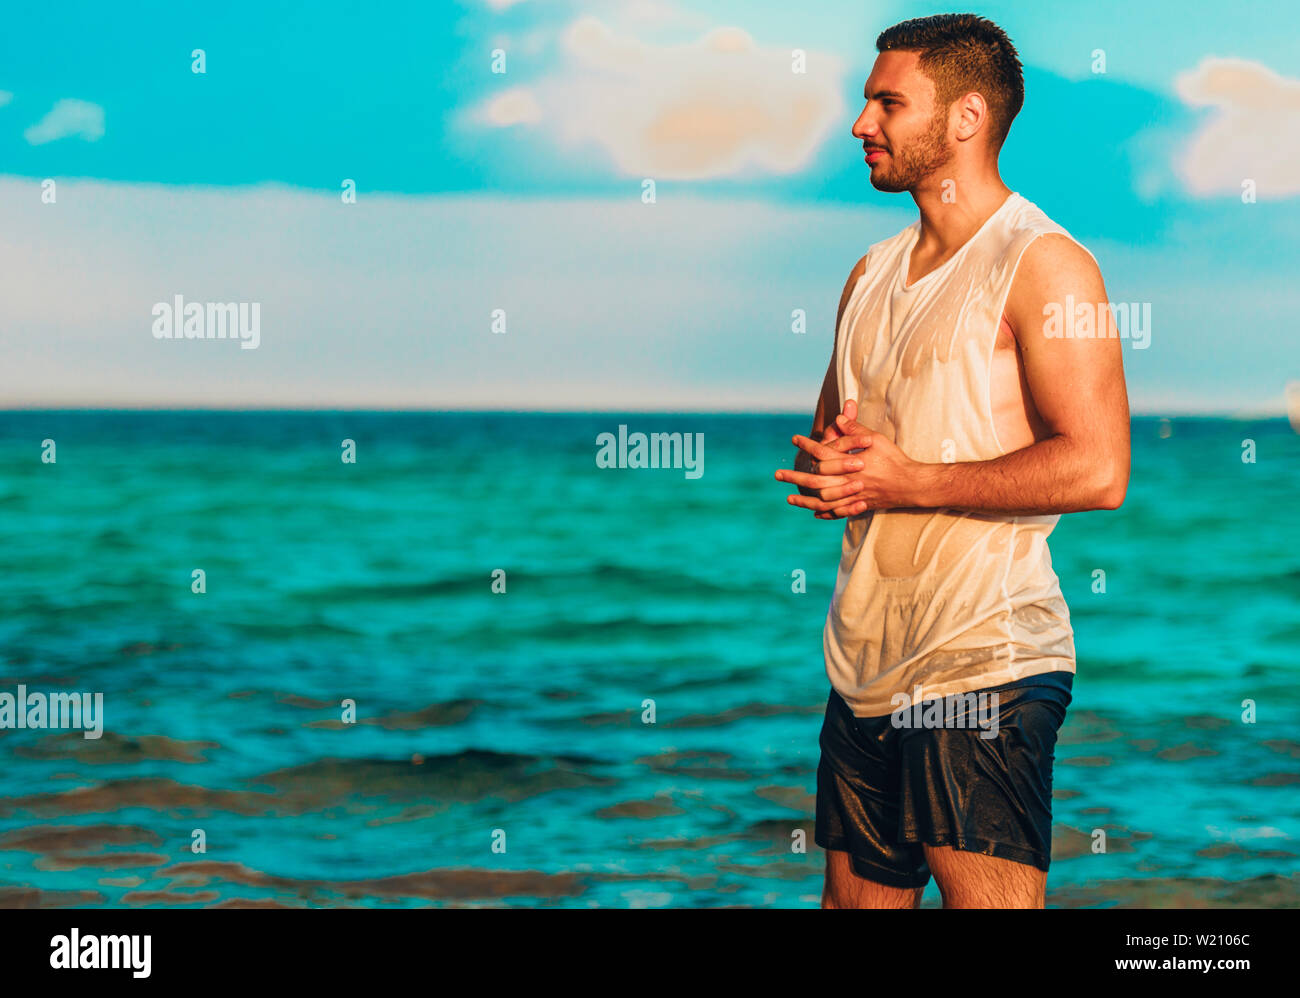 Beach Man Looking At Ocean Enjoying View Standing Handsome Fit Male Fitness Model On Beautiful 